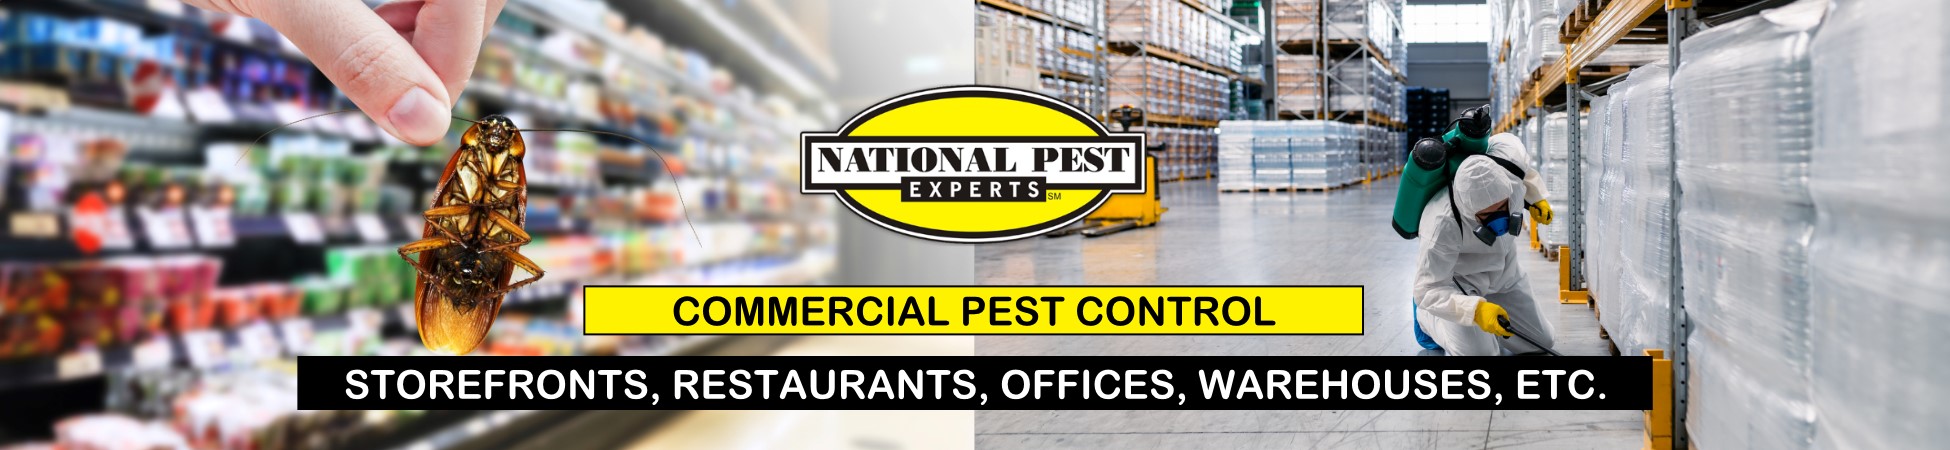 National Pest Experts - Commercial & Industrial exterminating and pest control in North Massapequa, NY